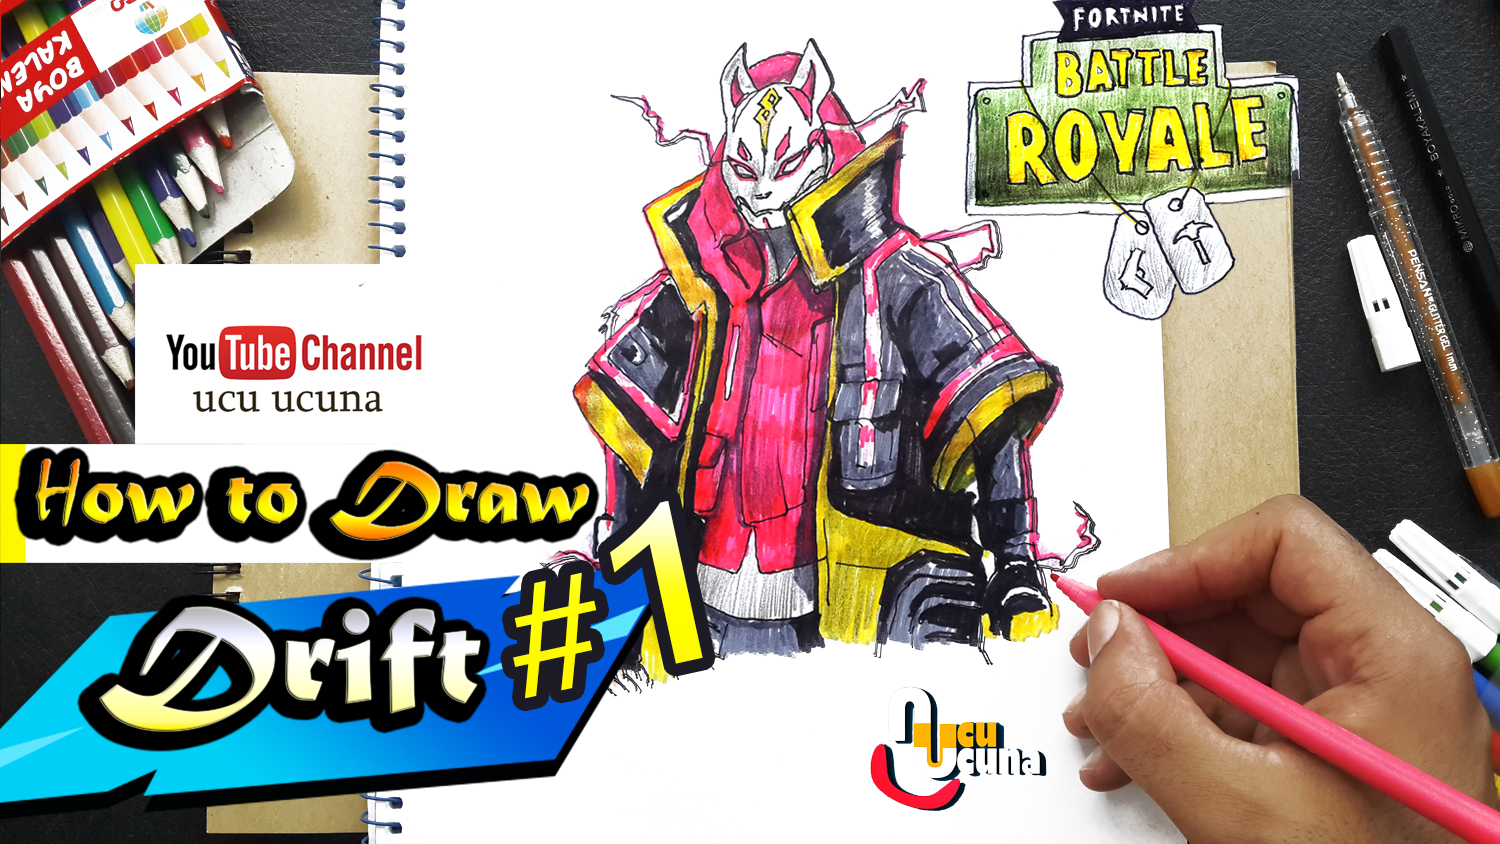 How to draw drift tutorial youtube channel name is ucu ucuna learn how to draw drift fully upragaded from fortnite step by step beginner drawing tutorial of the drift skin from fortnite kids for art funny video